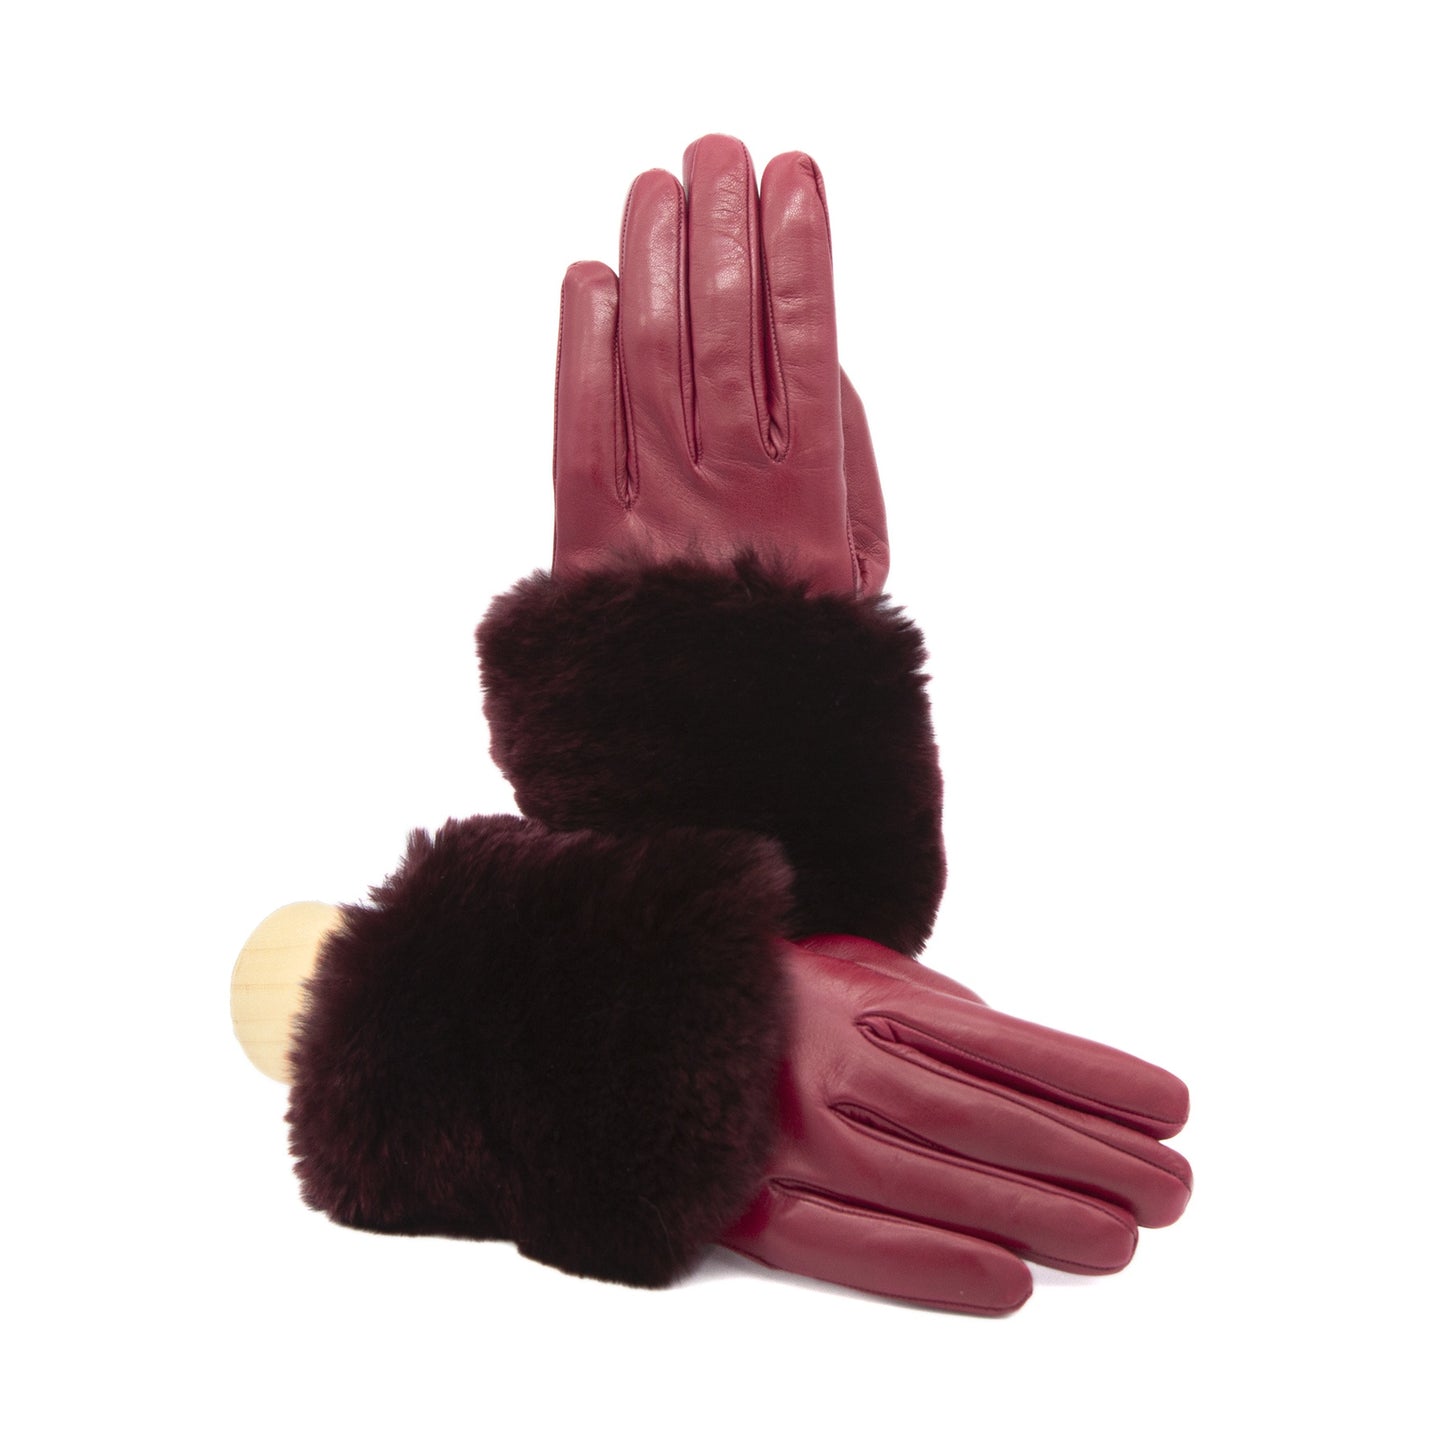 Women's rum nappa leather gloves with a wide real fur panel on the top and cashmere lined